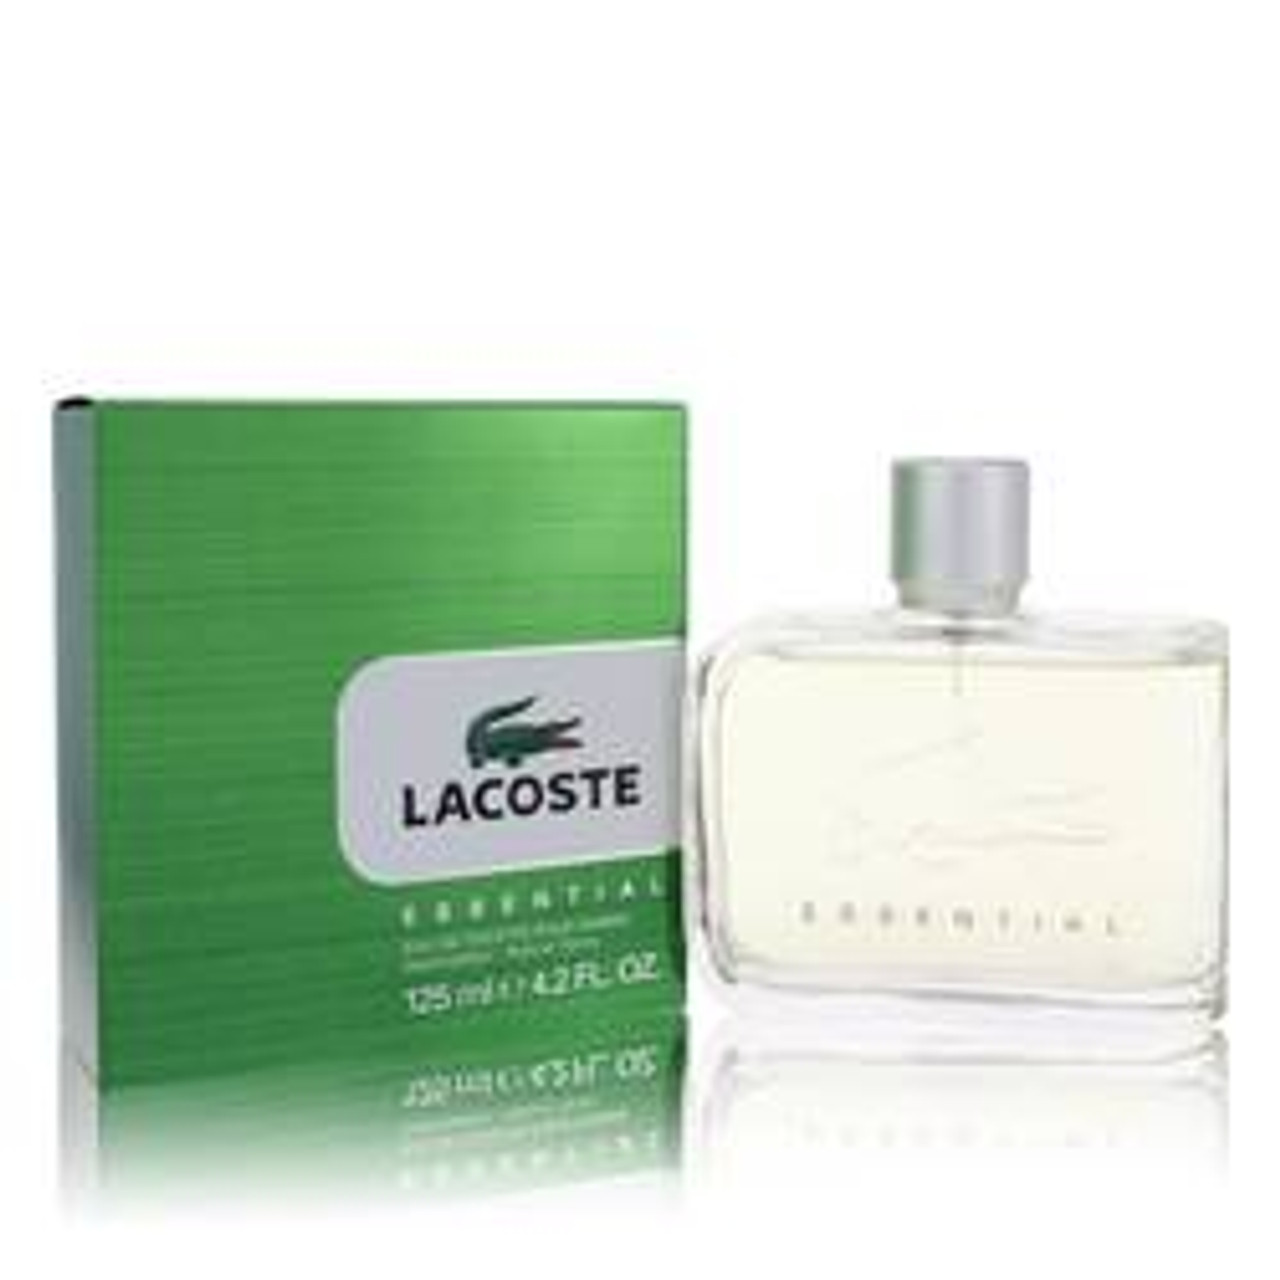 Lacoste Essential Cologne By Lacoste Eau De Toilette Spray 4.2 oz for Men - [From 116.00 - Choose pk Qty ] - *Ships from Miami